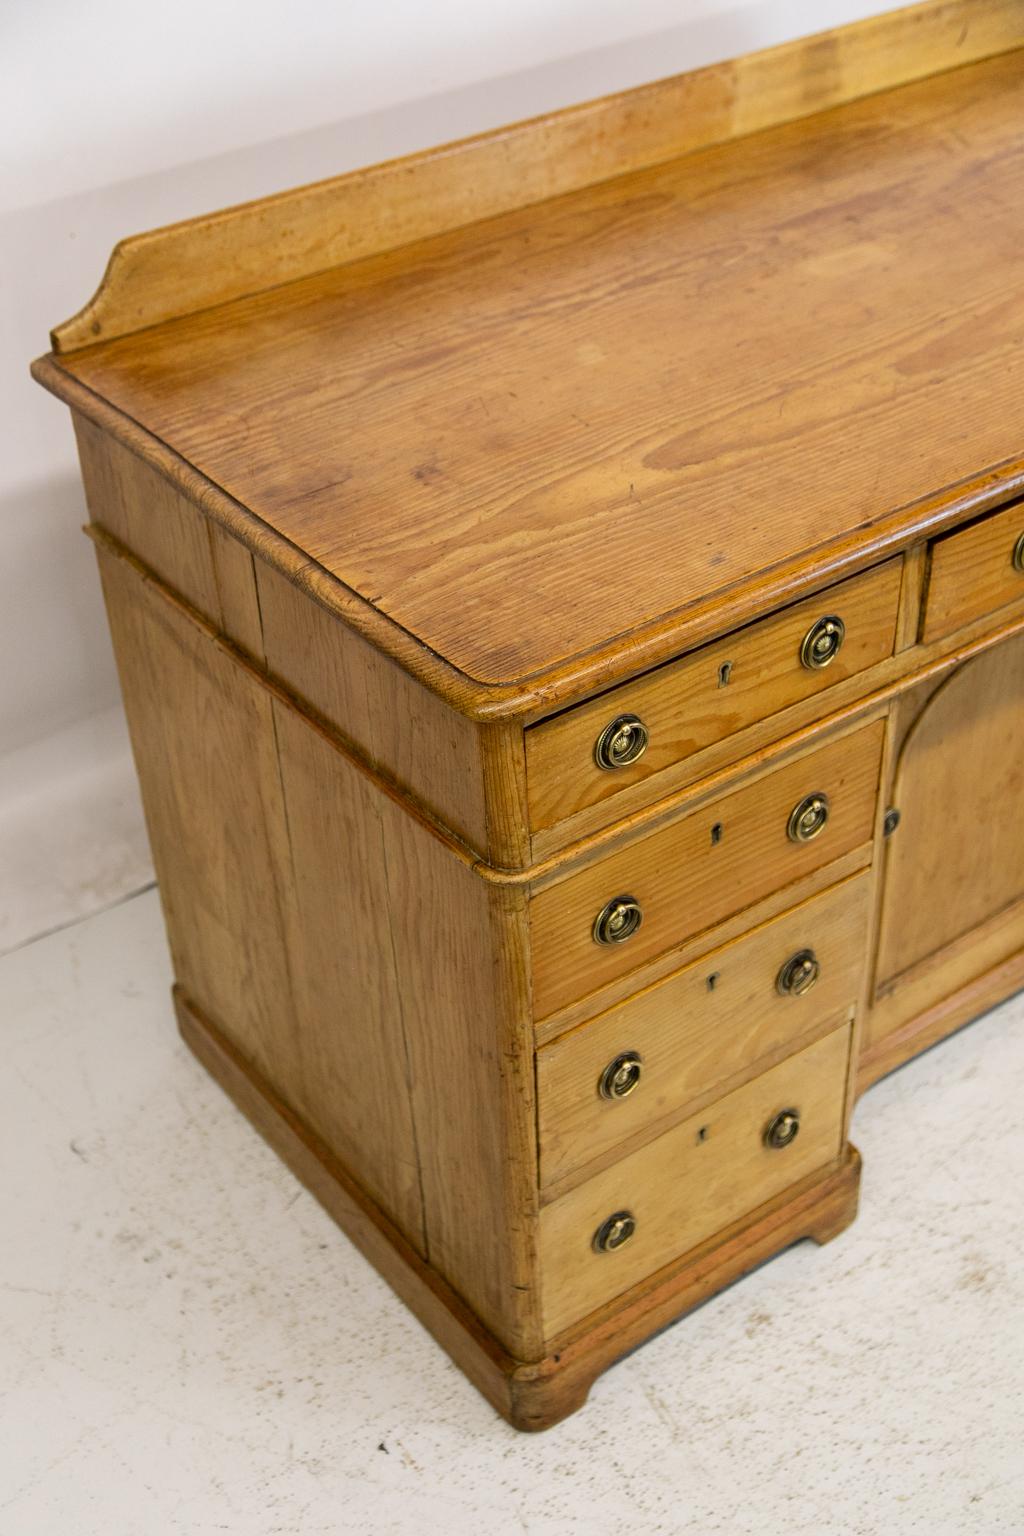 Mid-19th Century English Pine Knee Hole Server For Sale